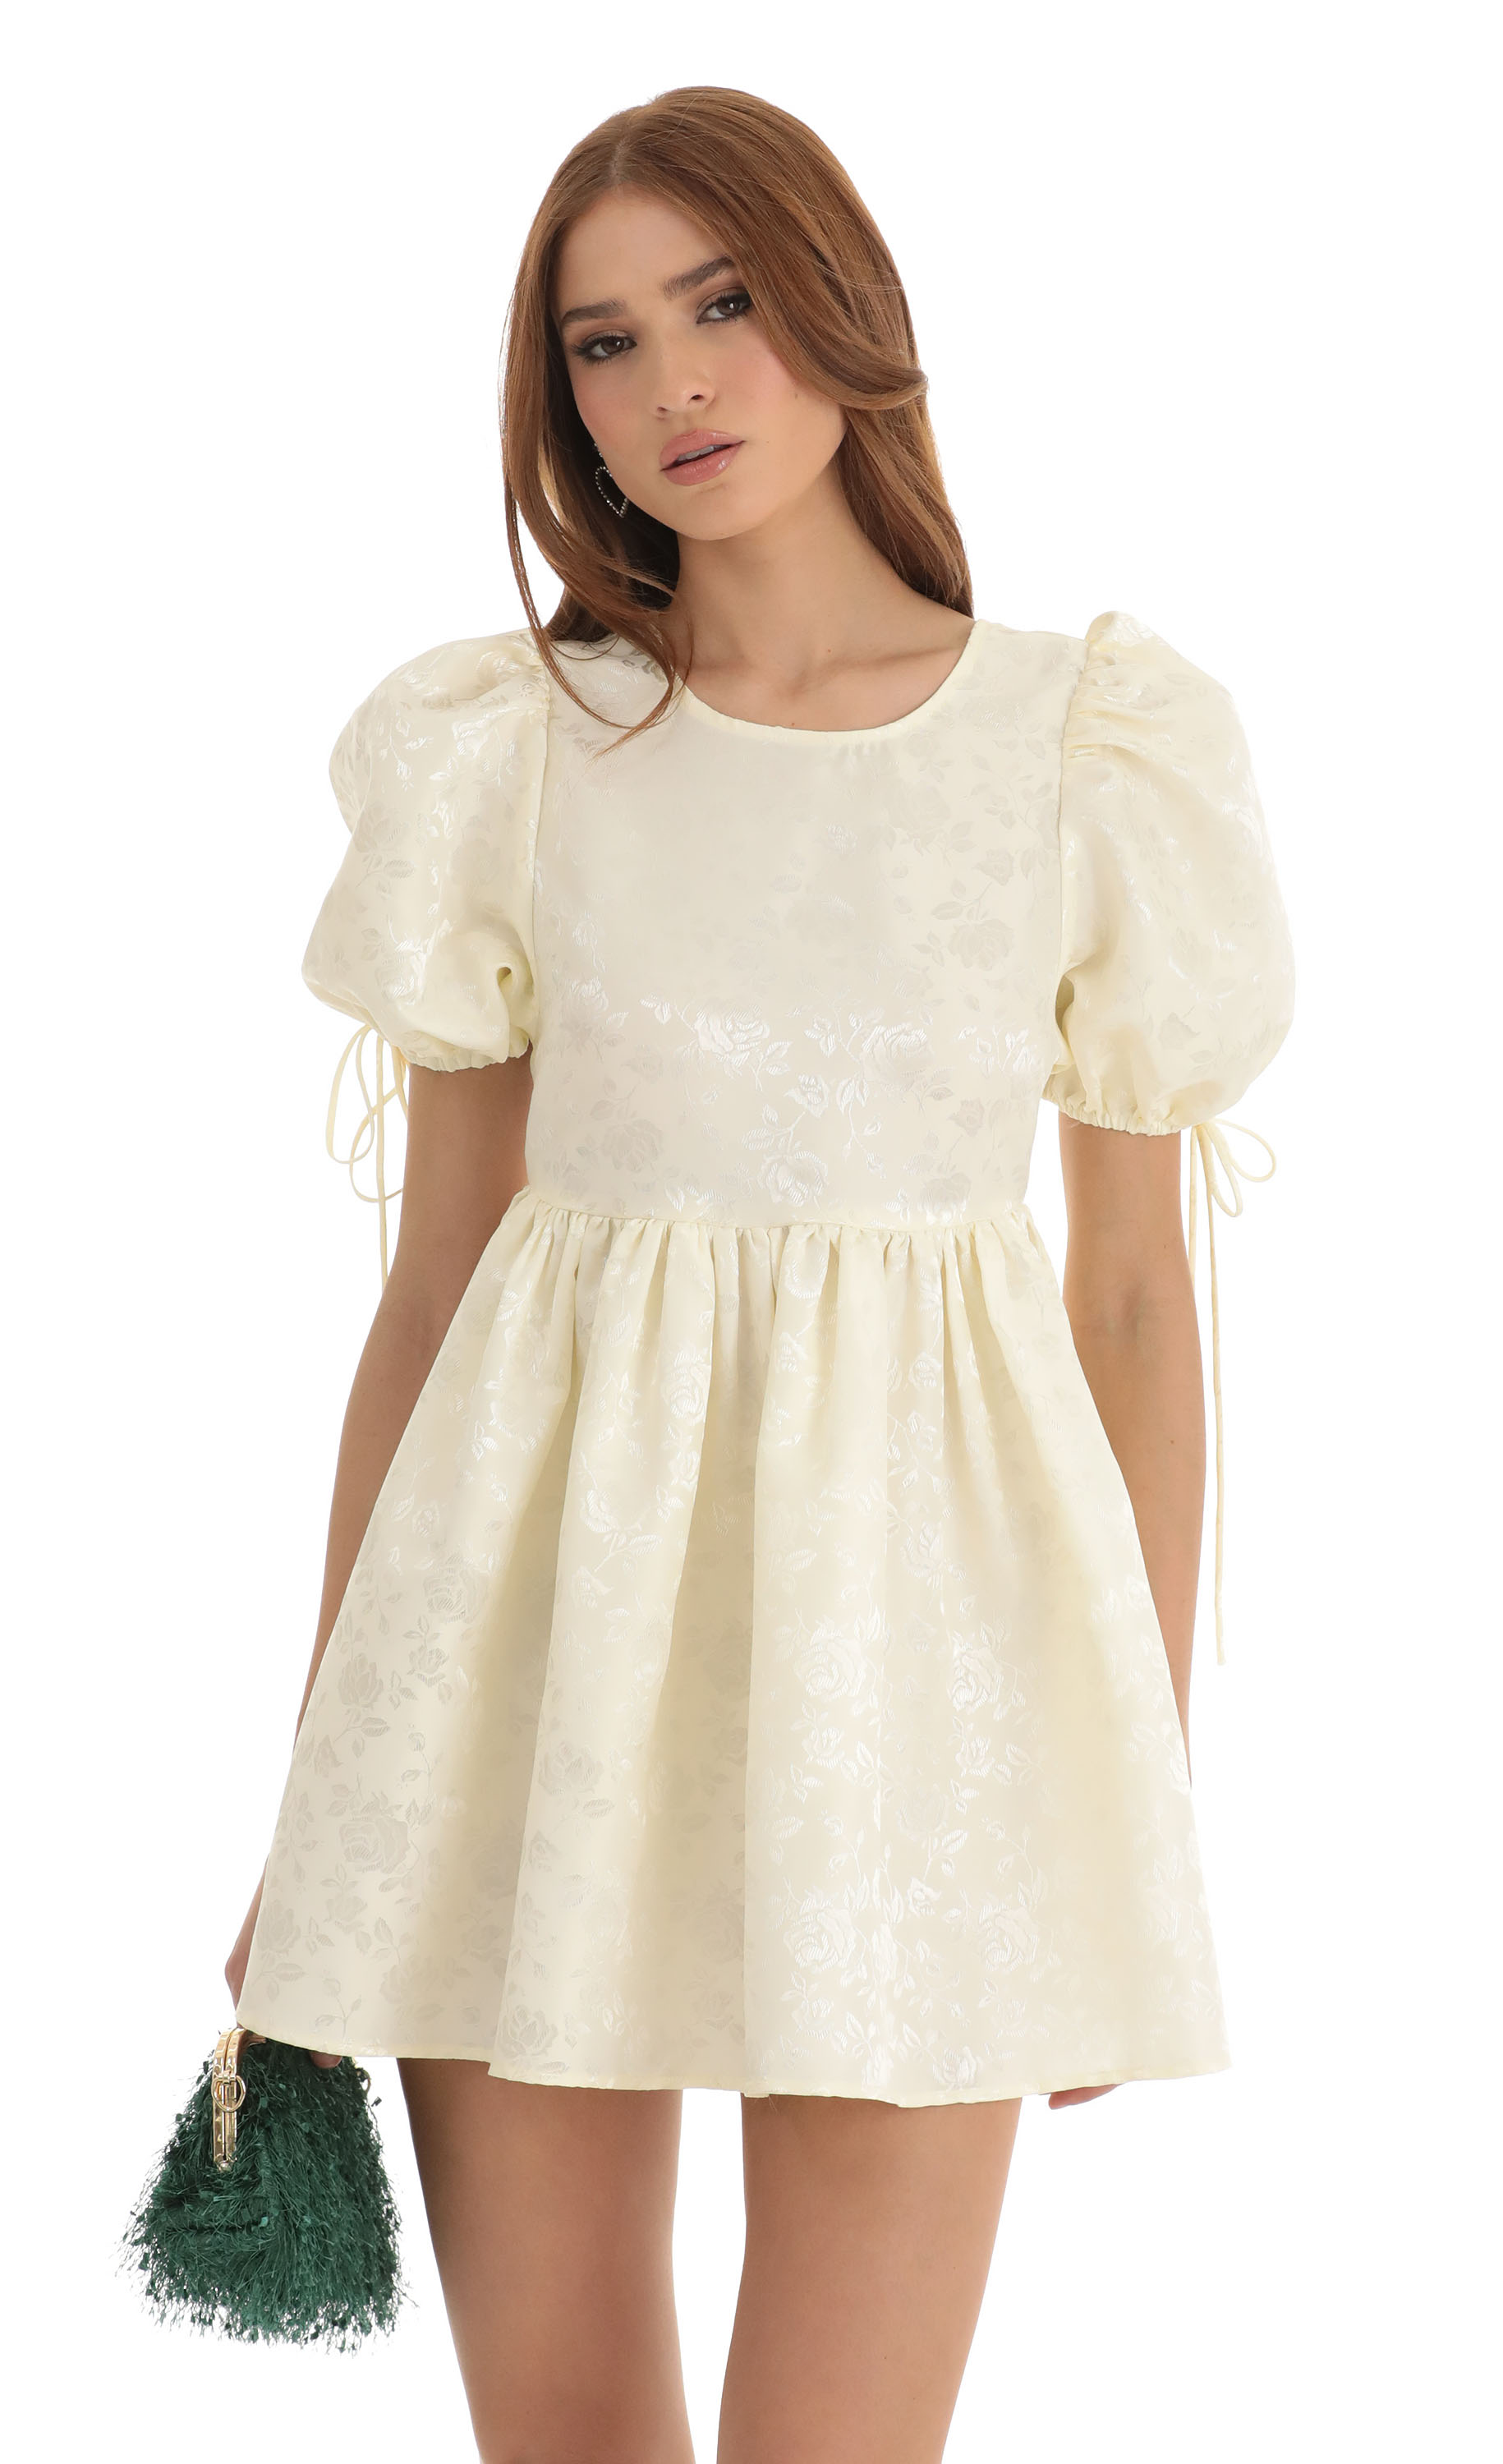 Floral Jacquard Baby Doll Dress in Cream